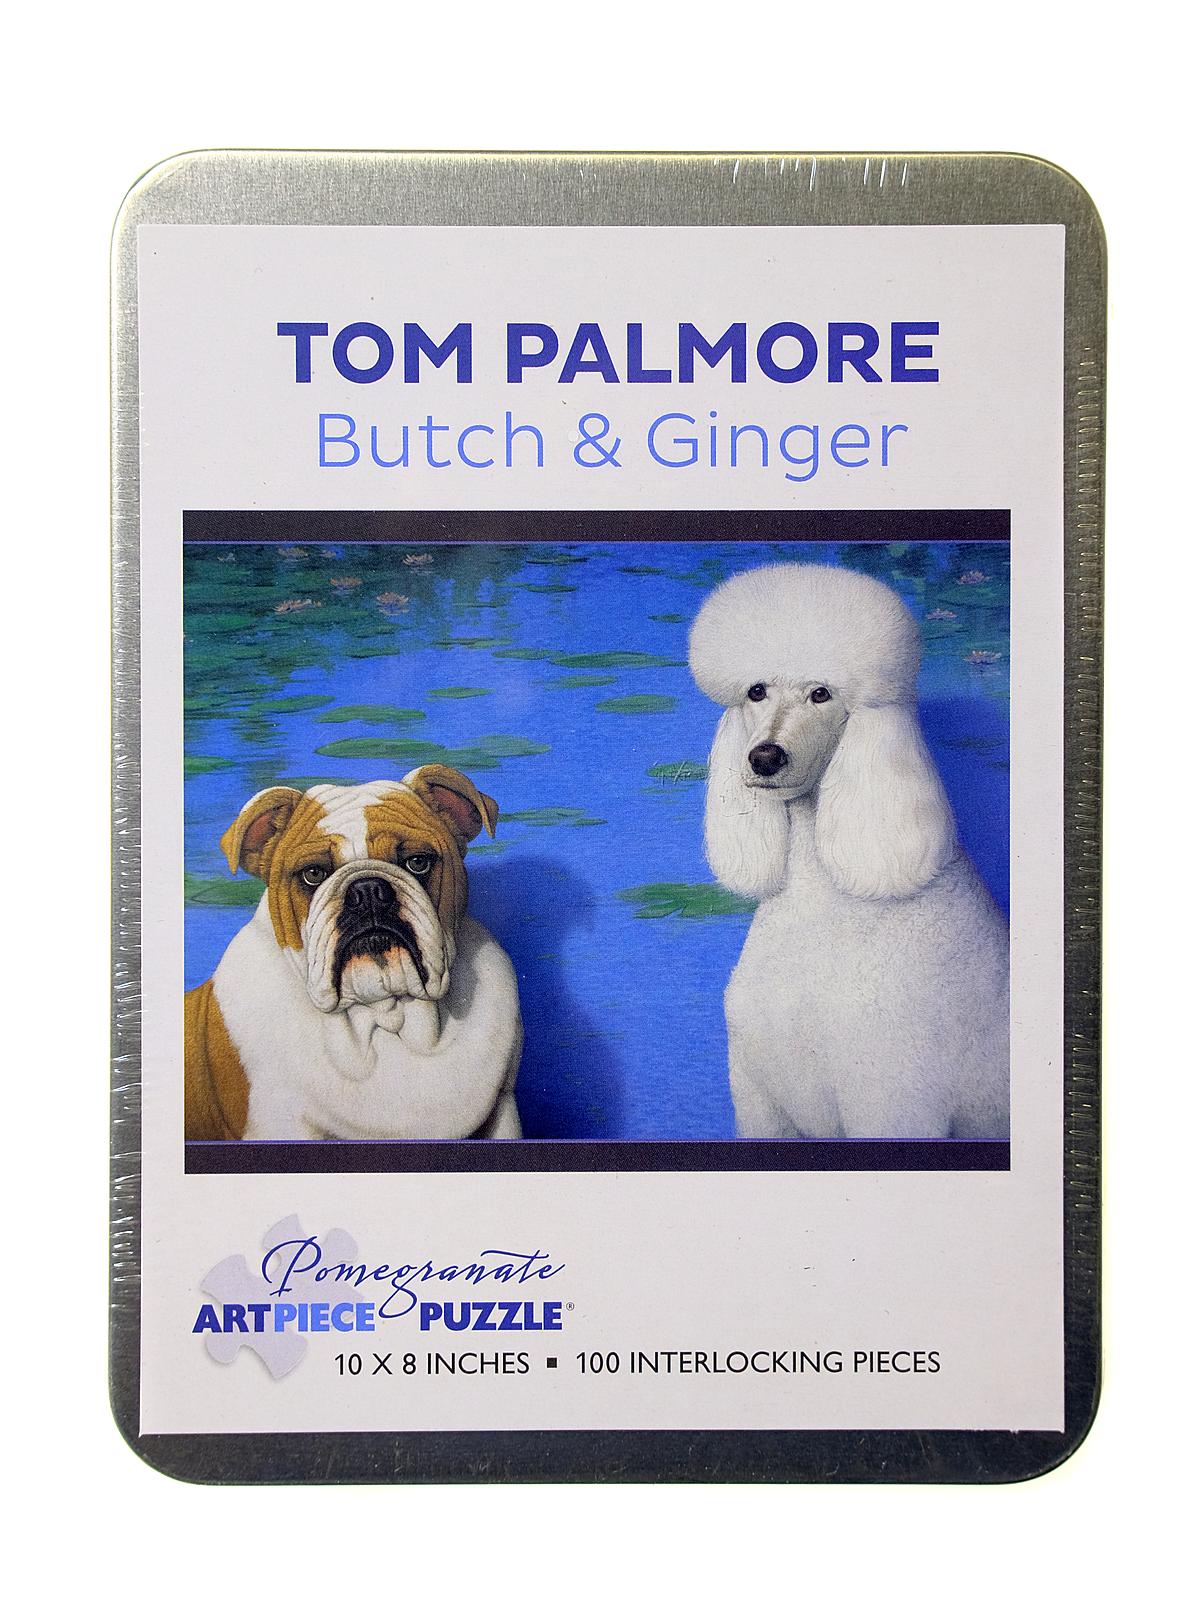 100-piece Jigsaw Puzzles Tom Palmore: Butch & Ginger